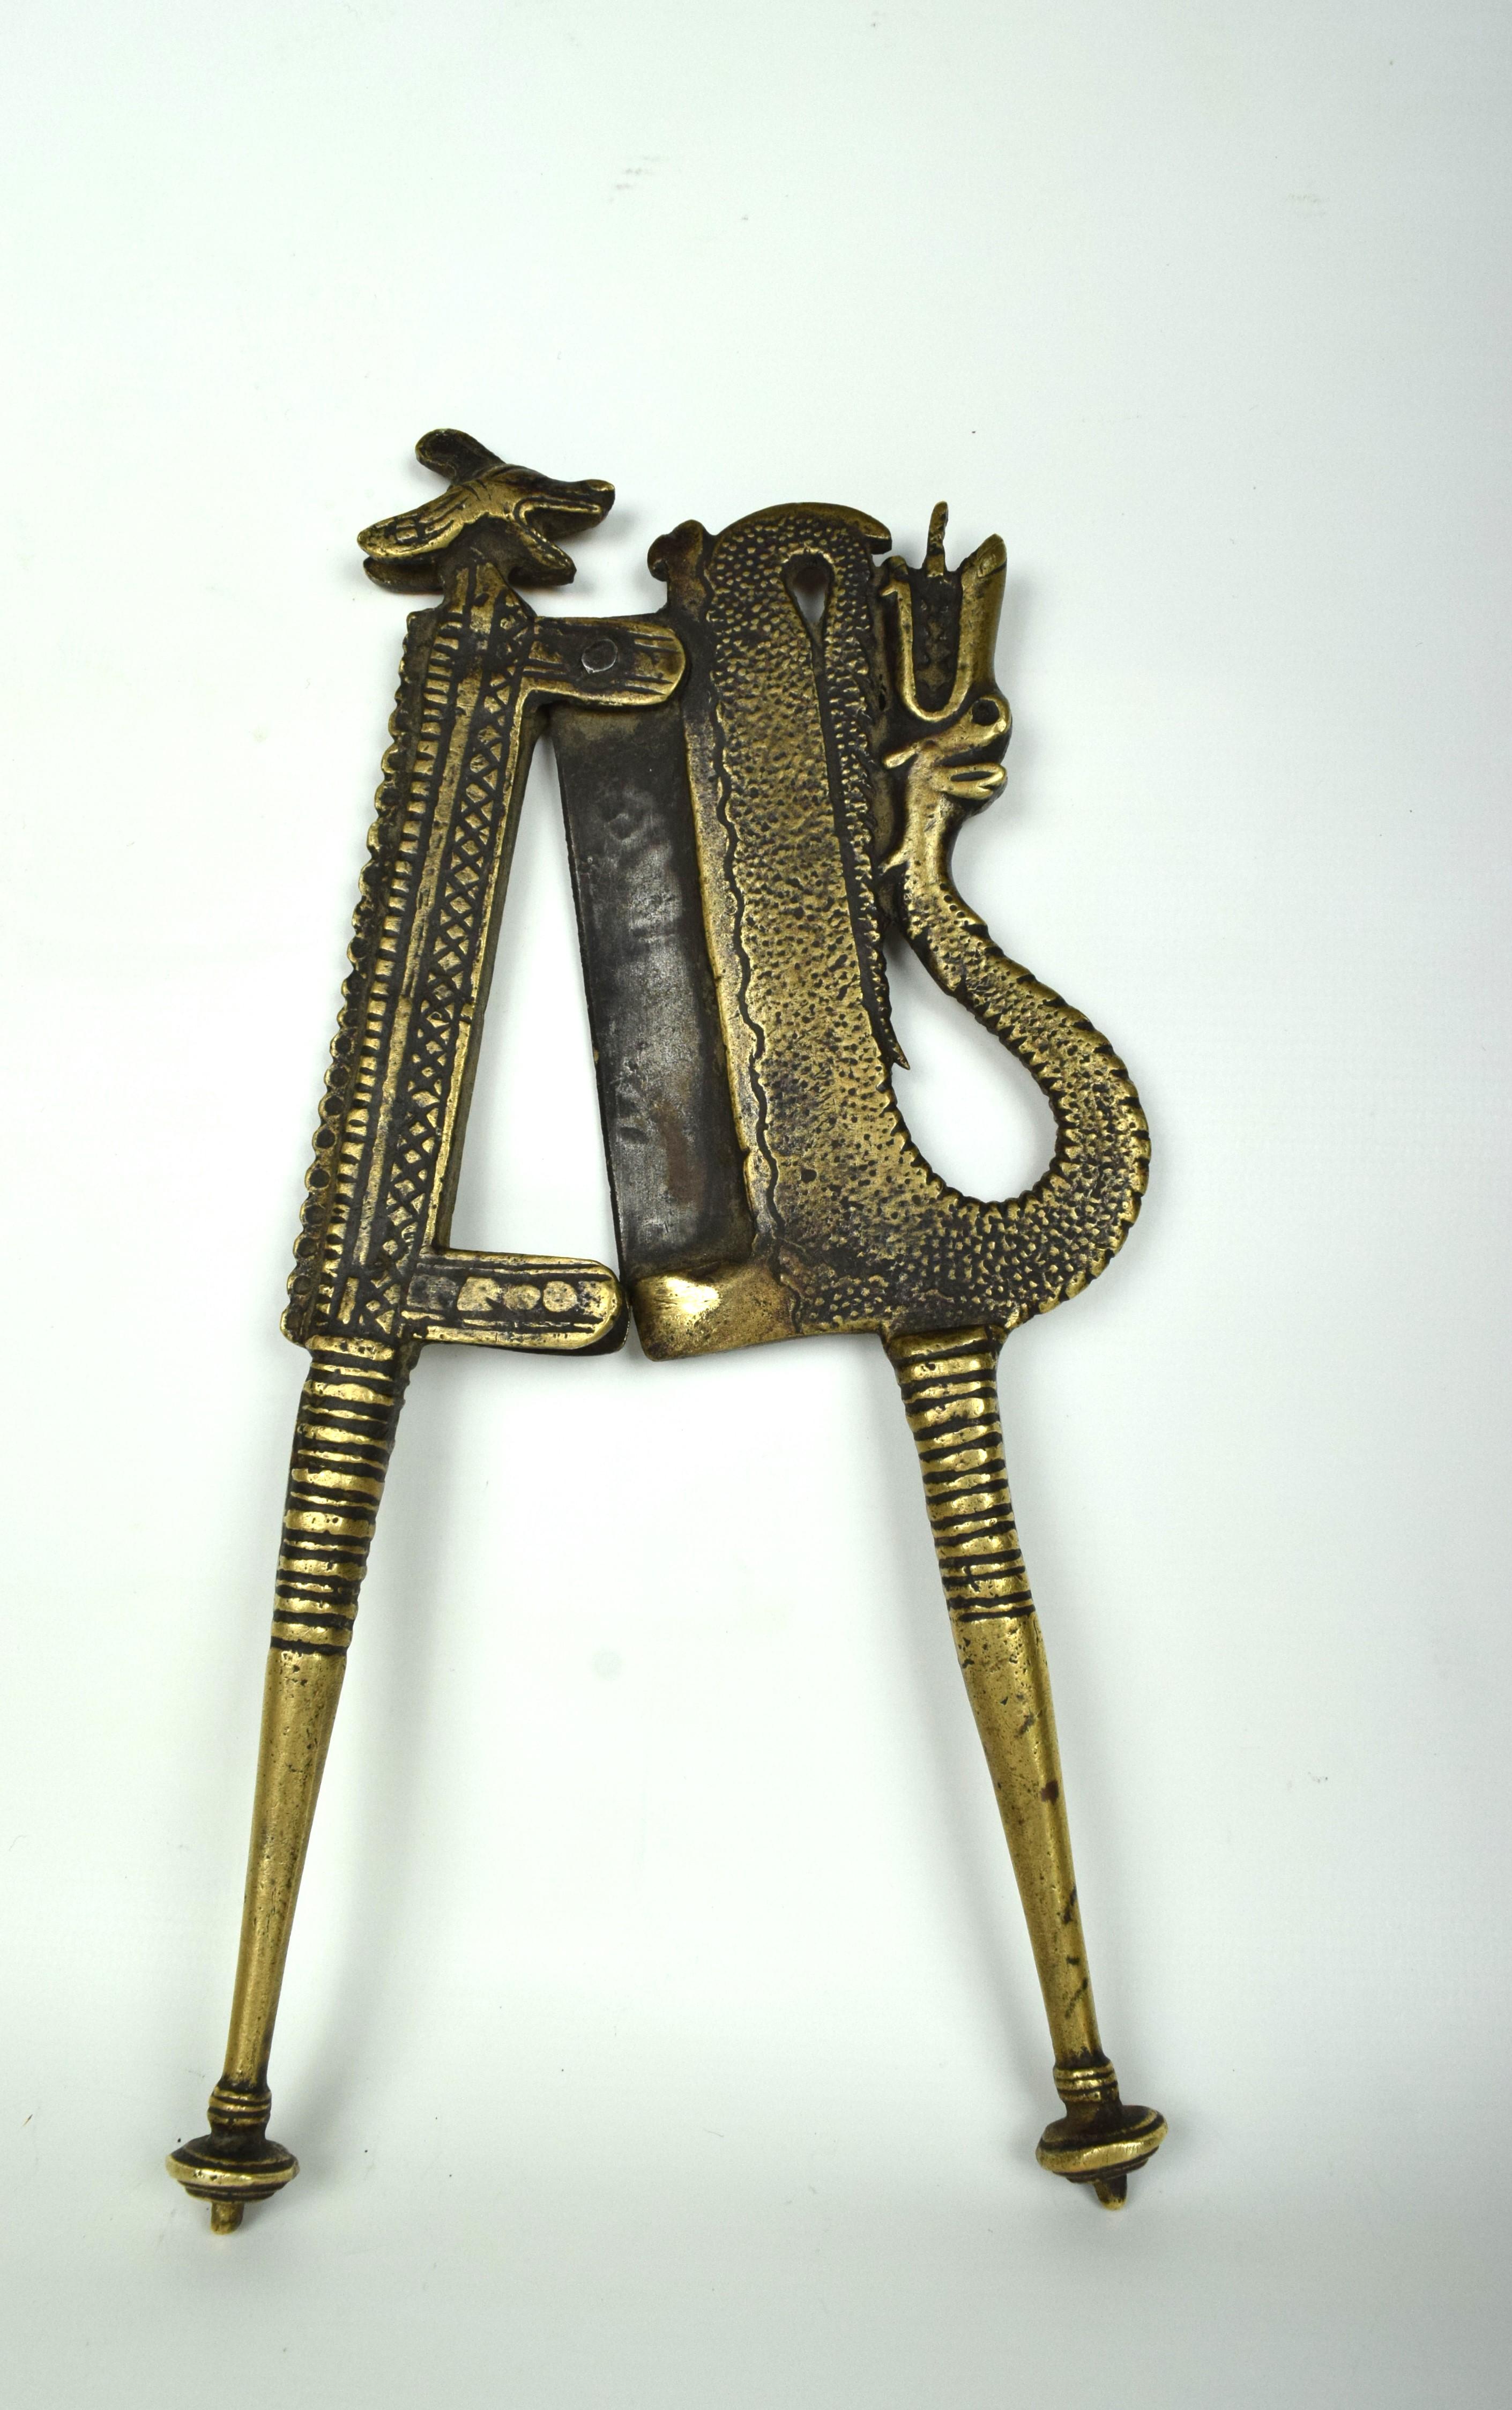 A 19th-century Mughal brass betel nut cutter, also known as a 